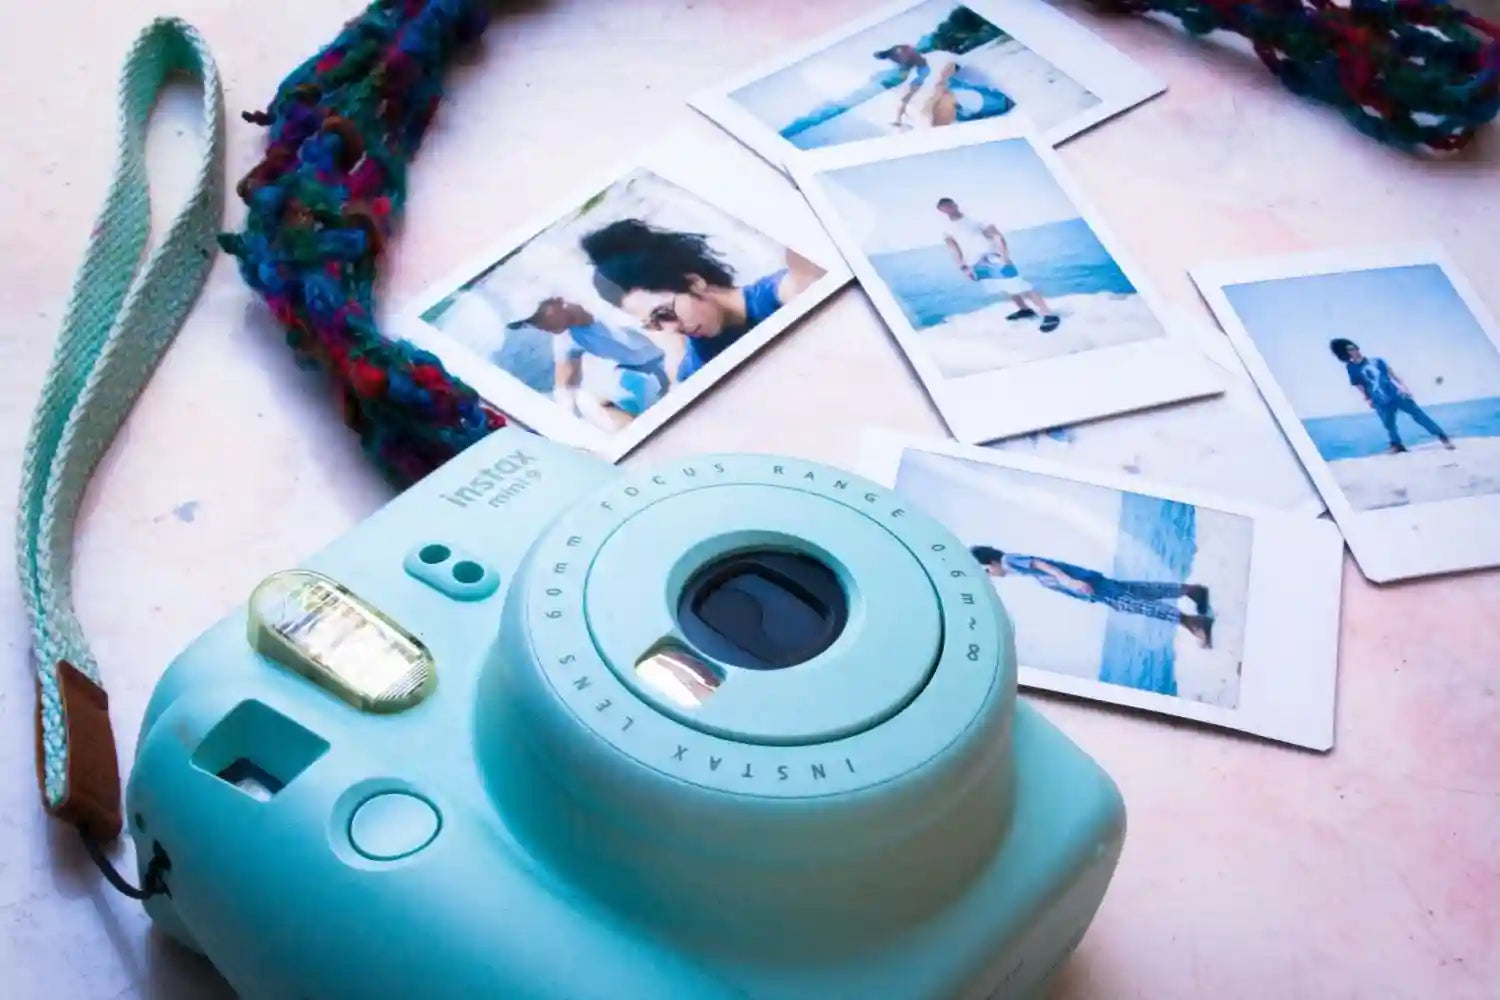 Instax Mini 9 and some photos